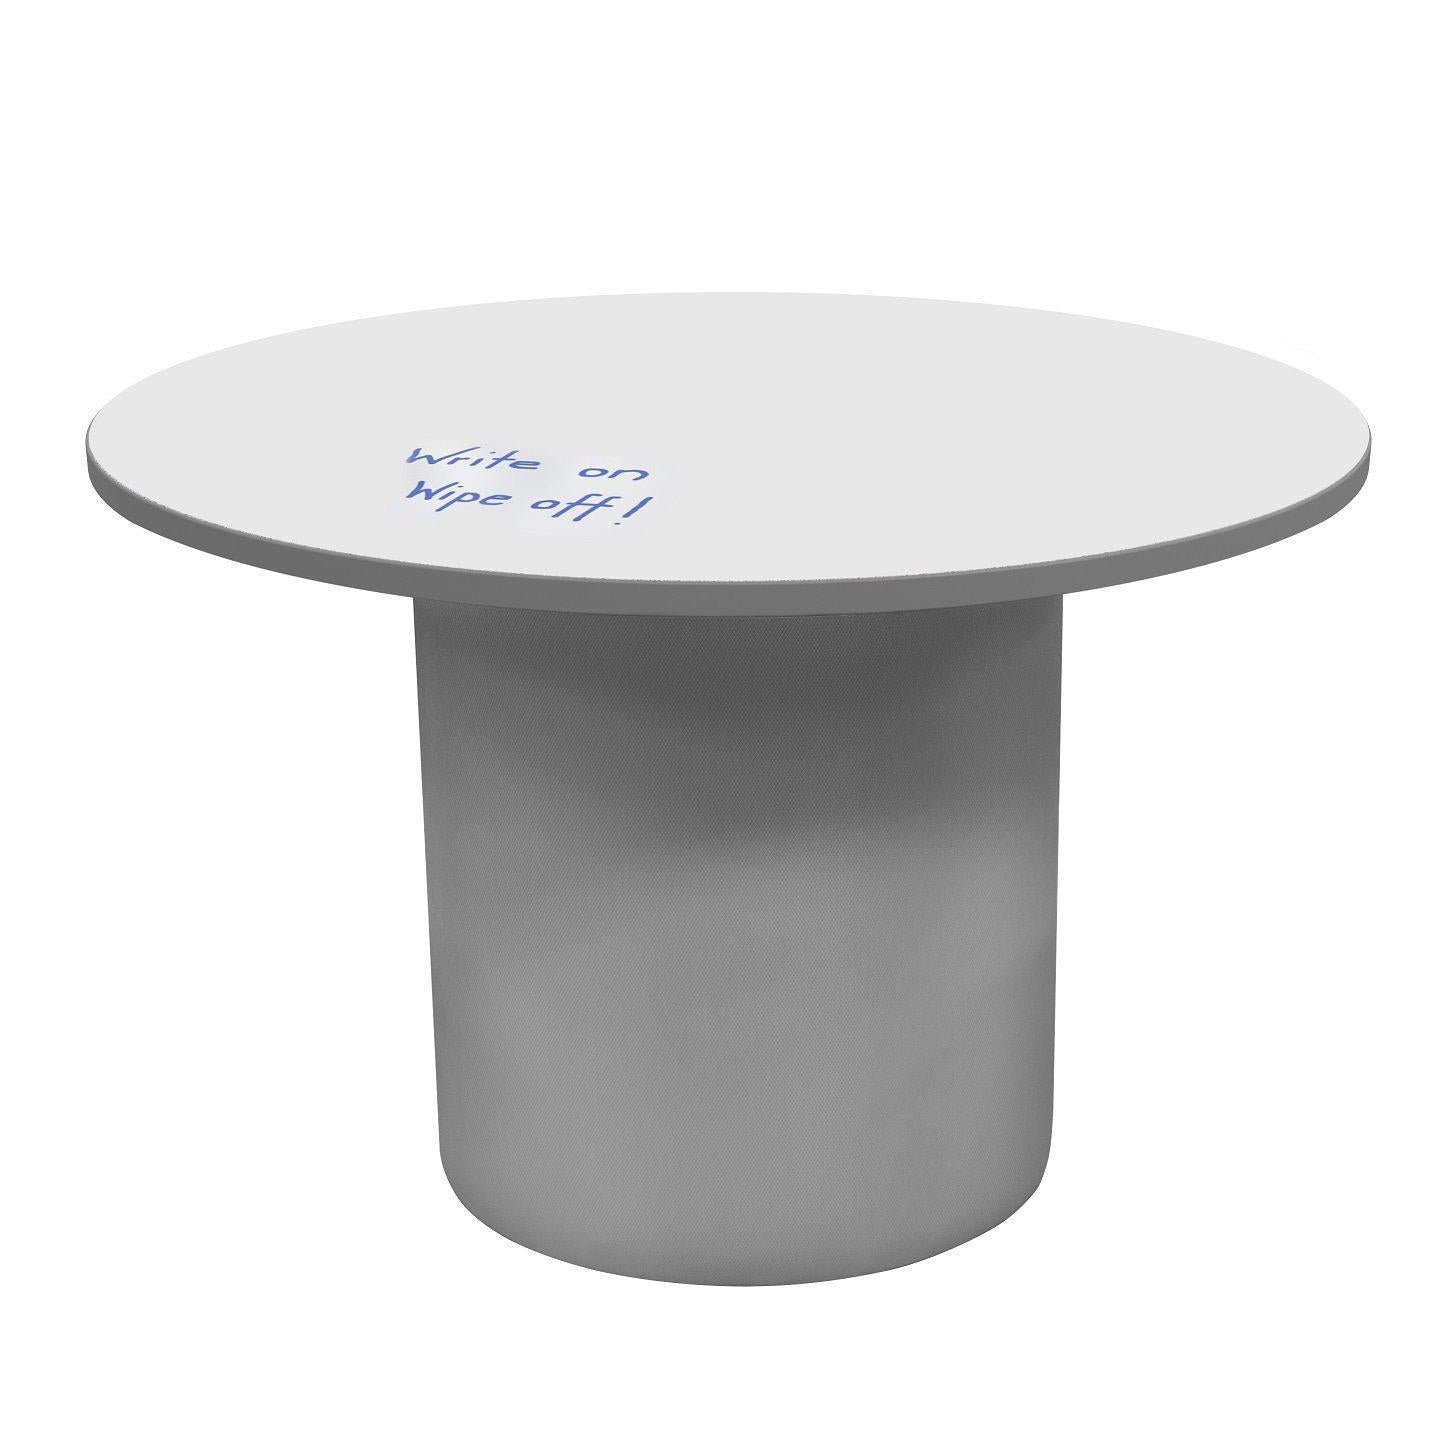 Sonik™ Soft Seating 48" Round Table with Markerboard Top and Power/Data Supply-Soft Seating-29"-Markerboard/Gray-Frost